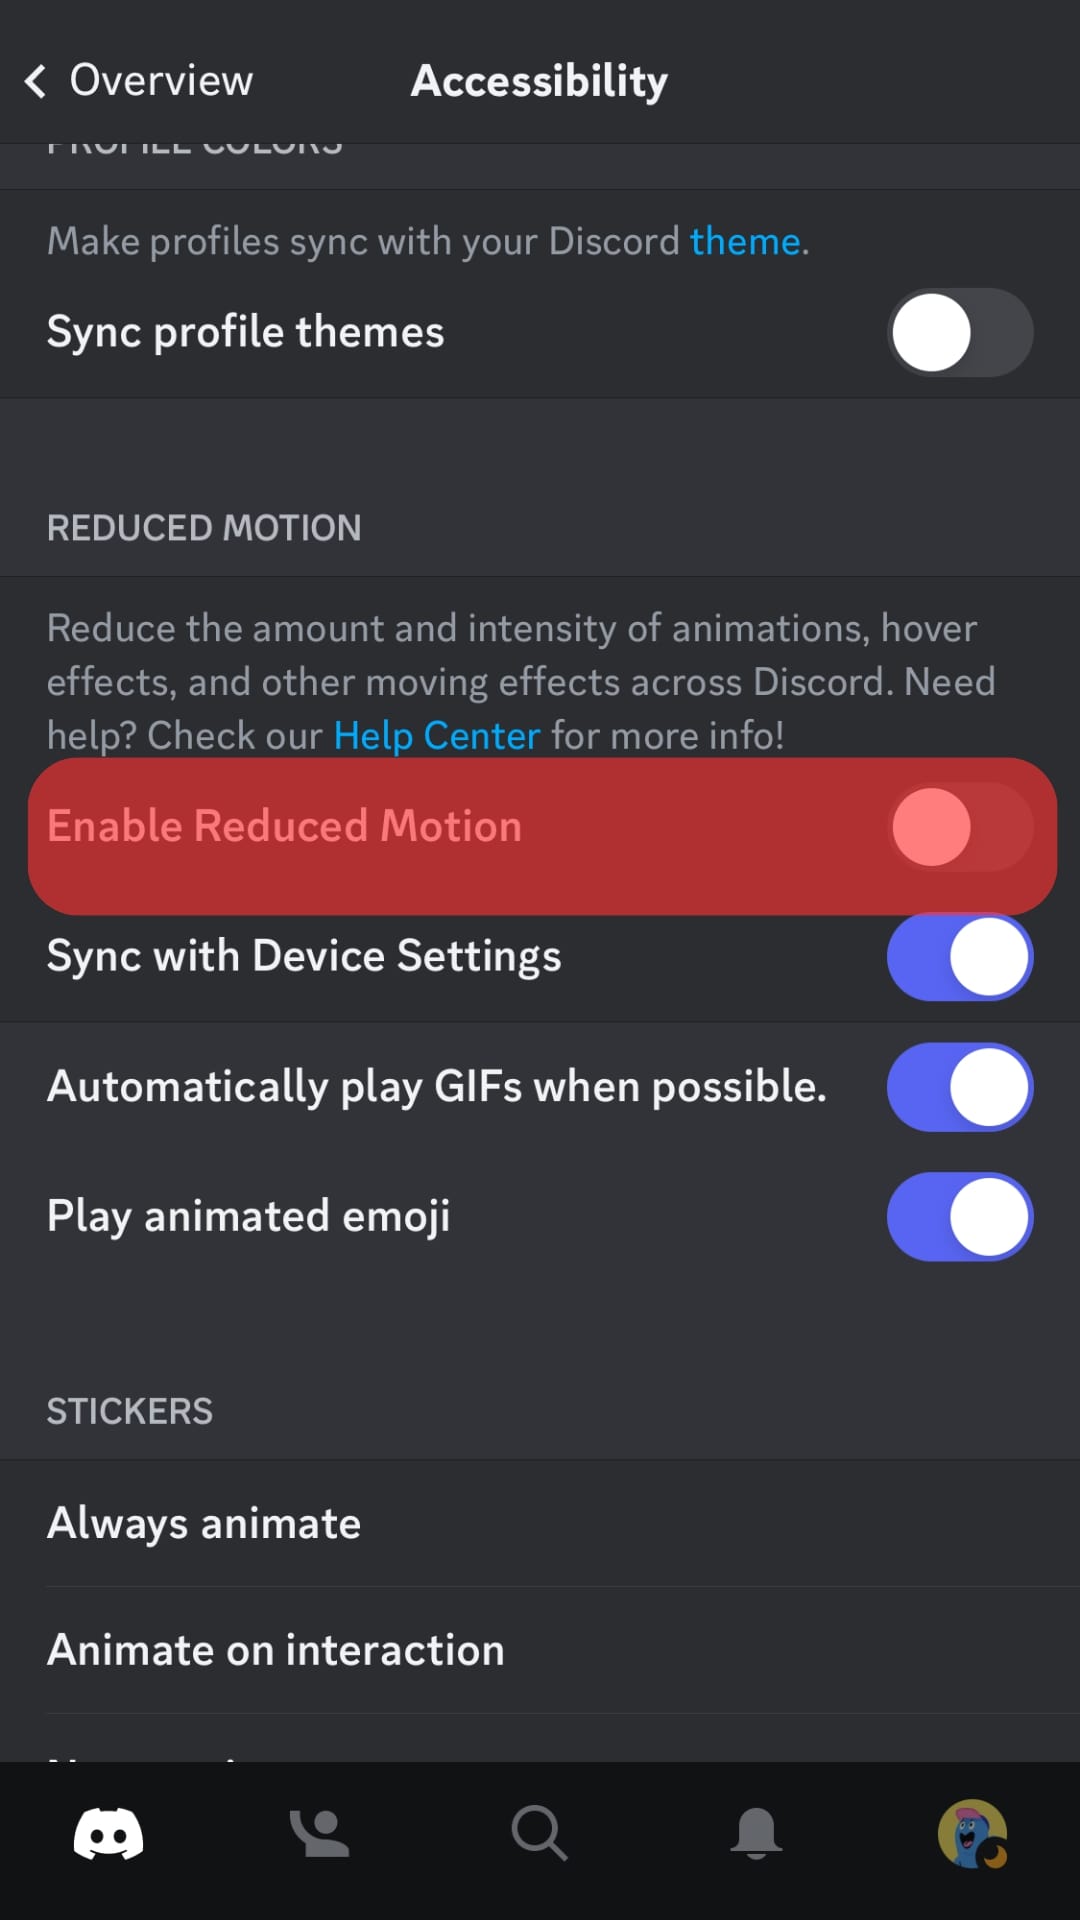 Switch Off The Reduce Motion Option.